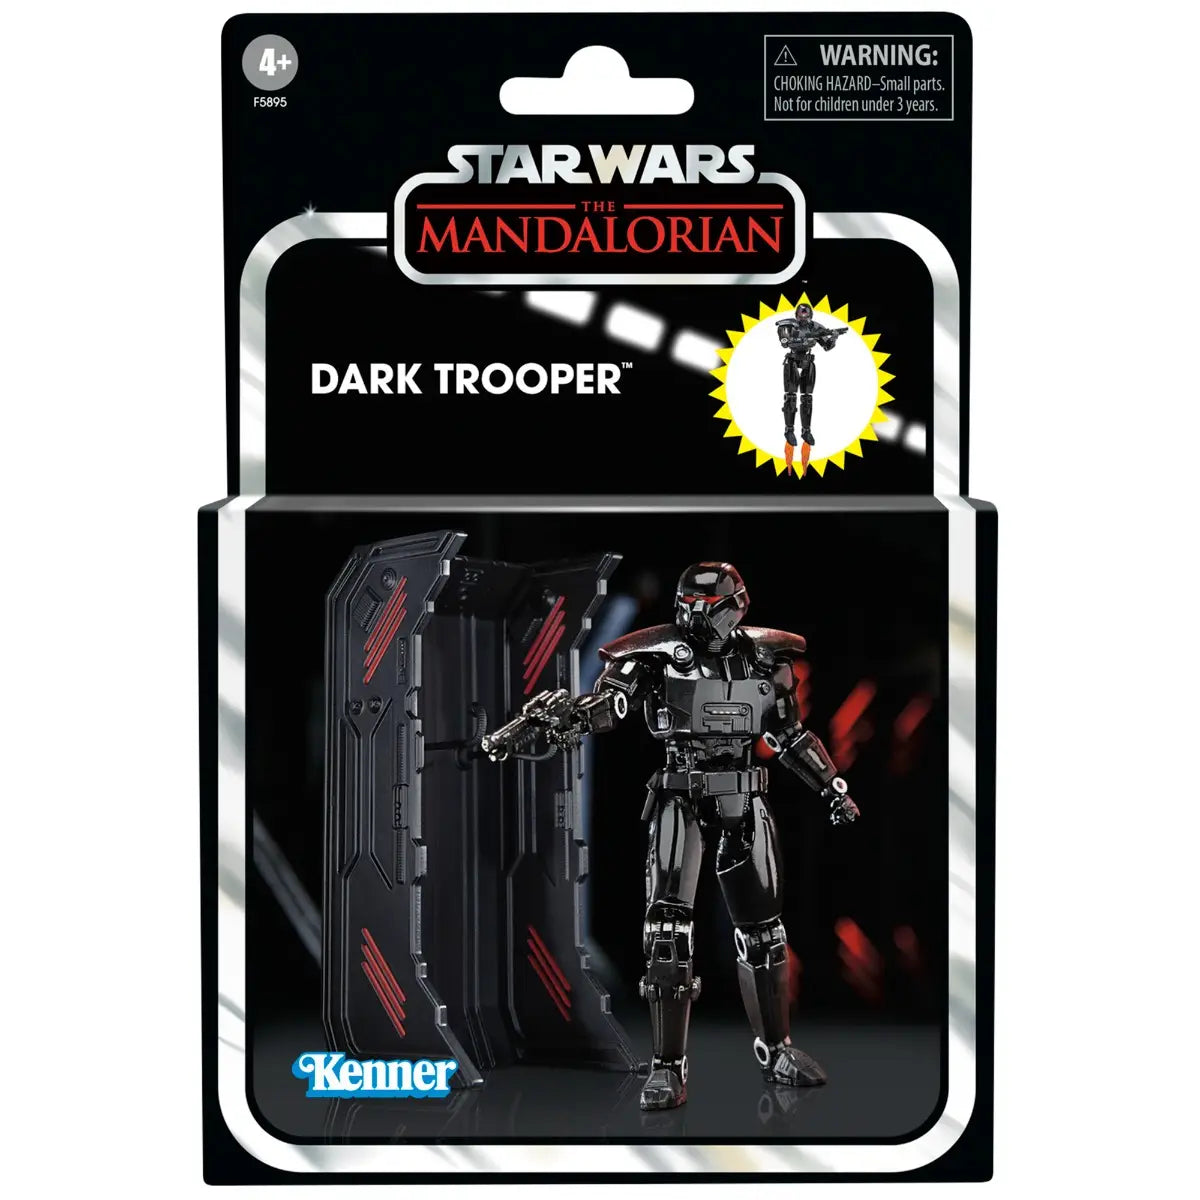 Star Wars The Vintage Collection: The Mandalorian - Dark Trooper Deluxe